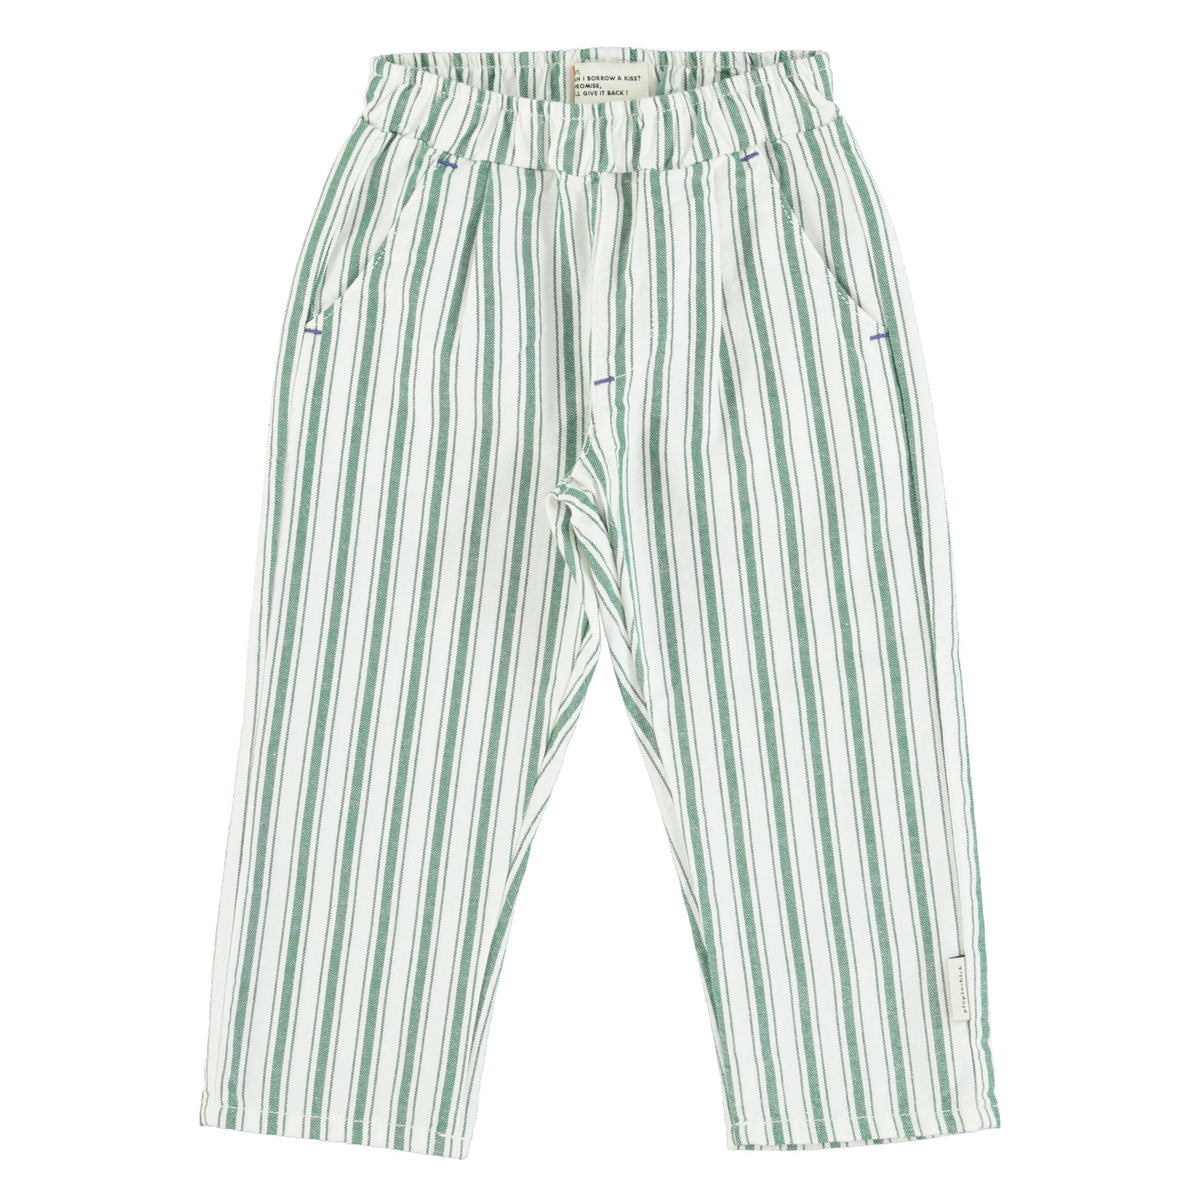 piupiuchick unisex trousers - white with large green stripes